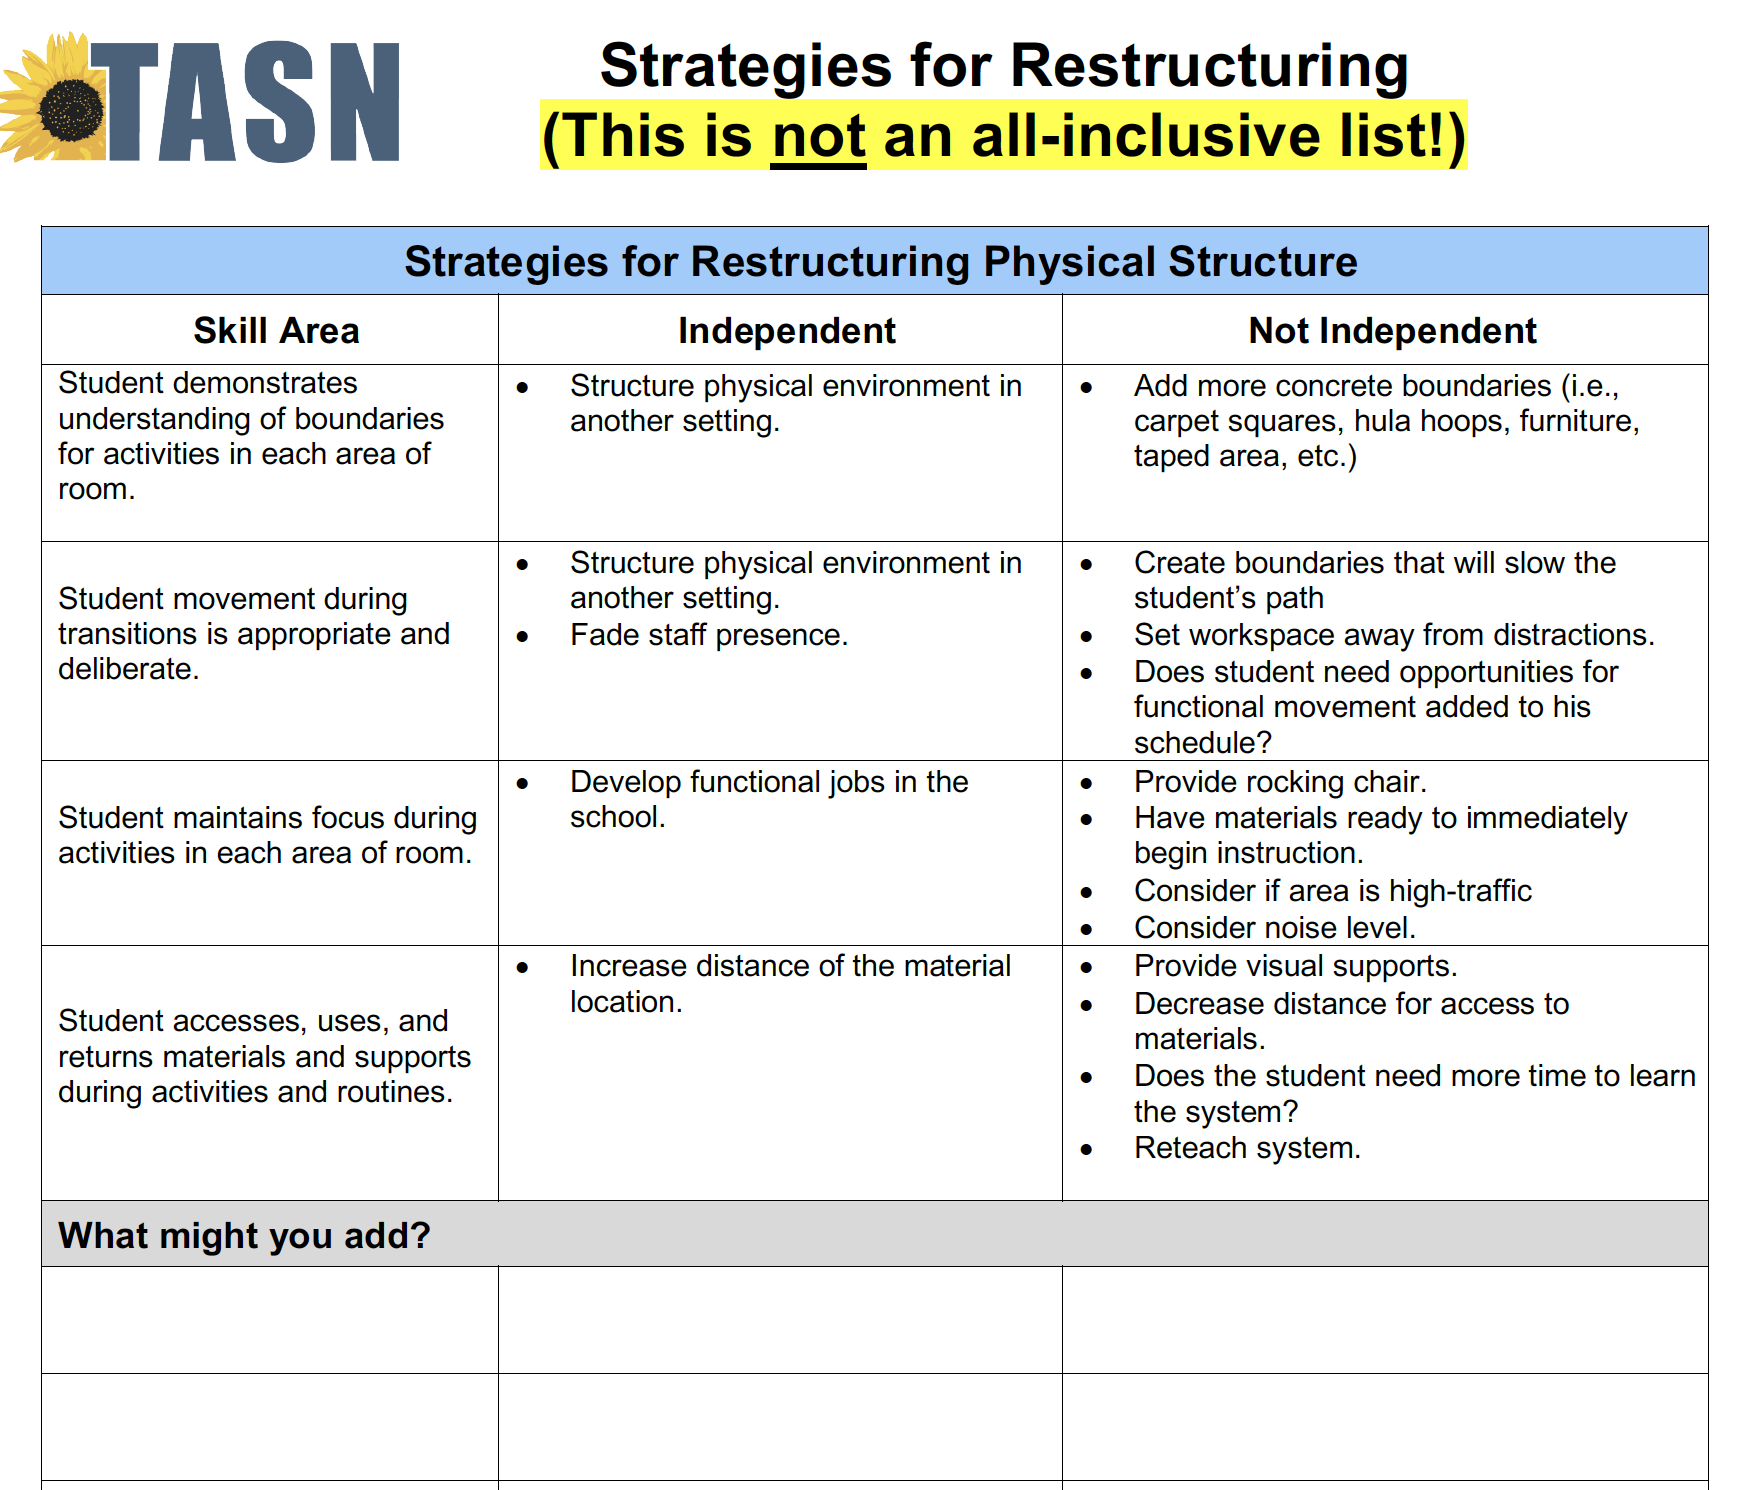 List of strategies when considering restructuring. 